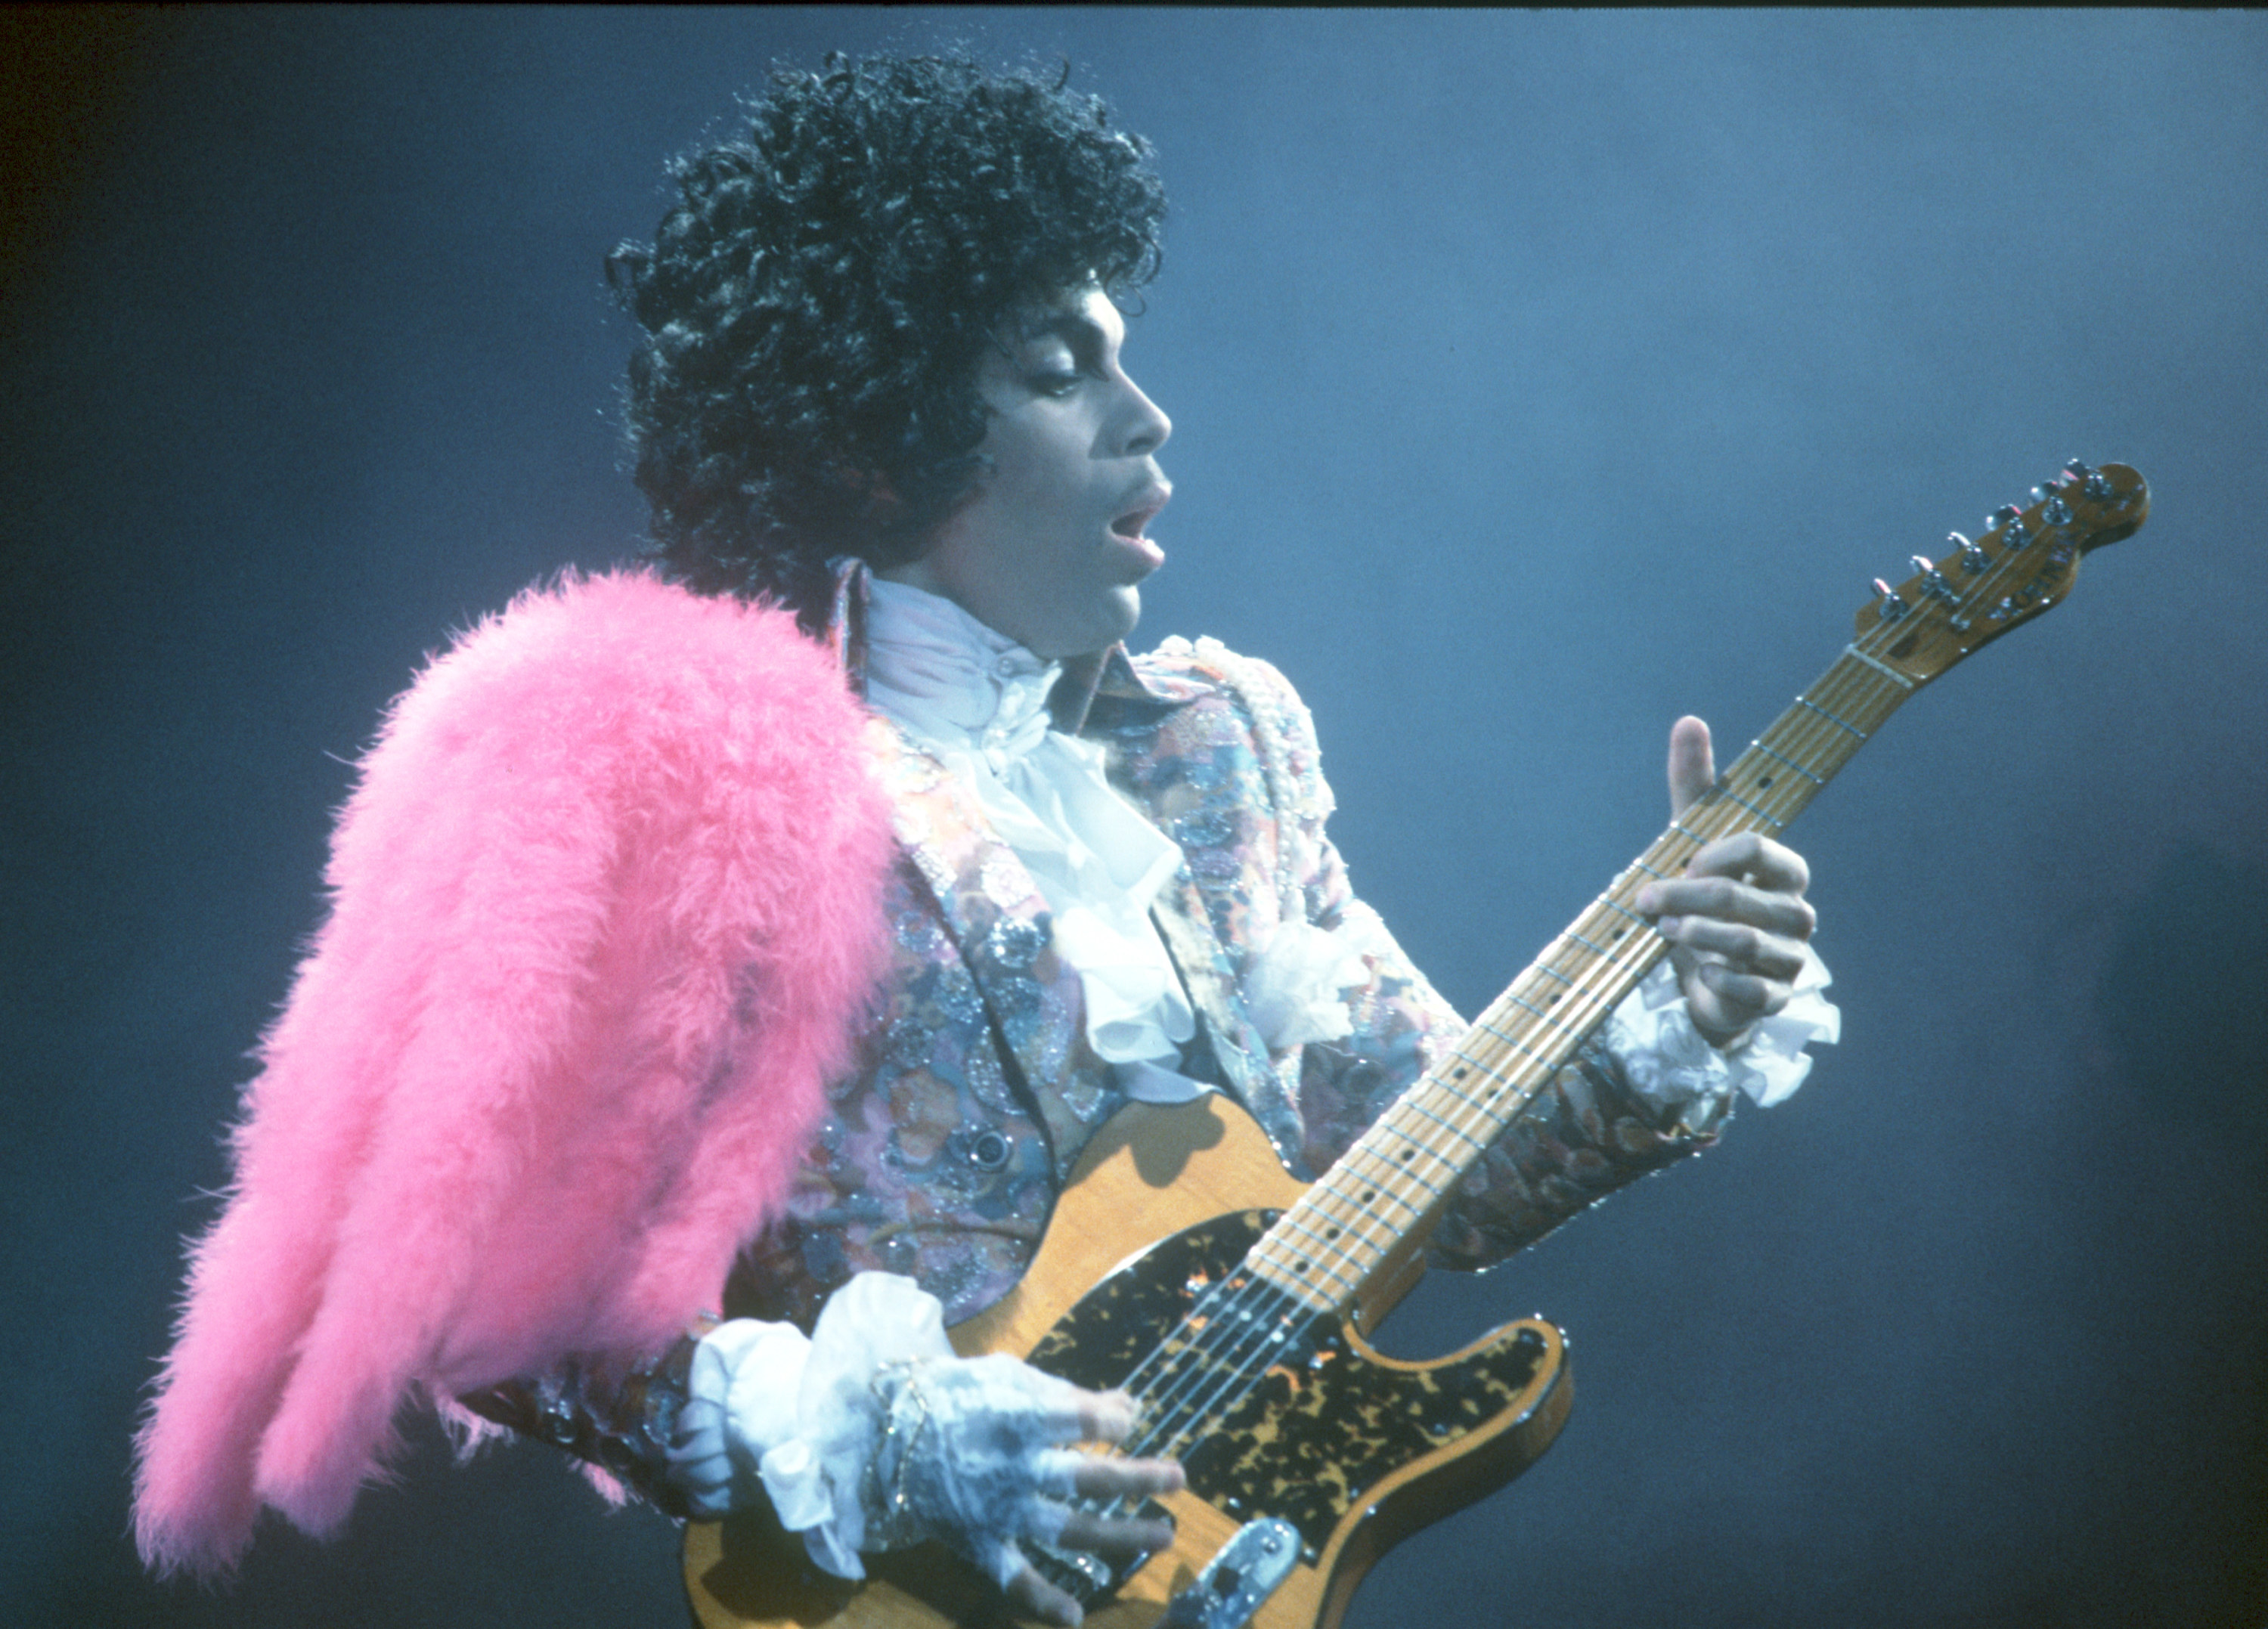 Prince wears a bright pink wing while he plays the electric guitar.